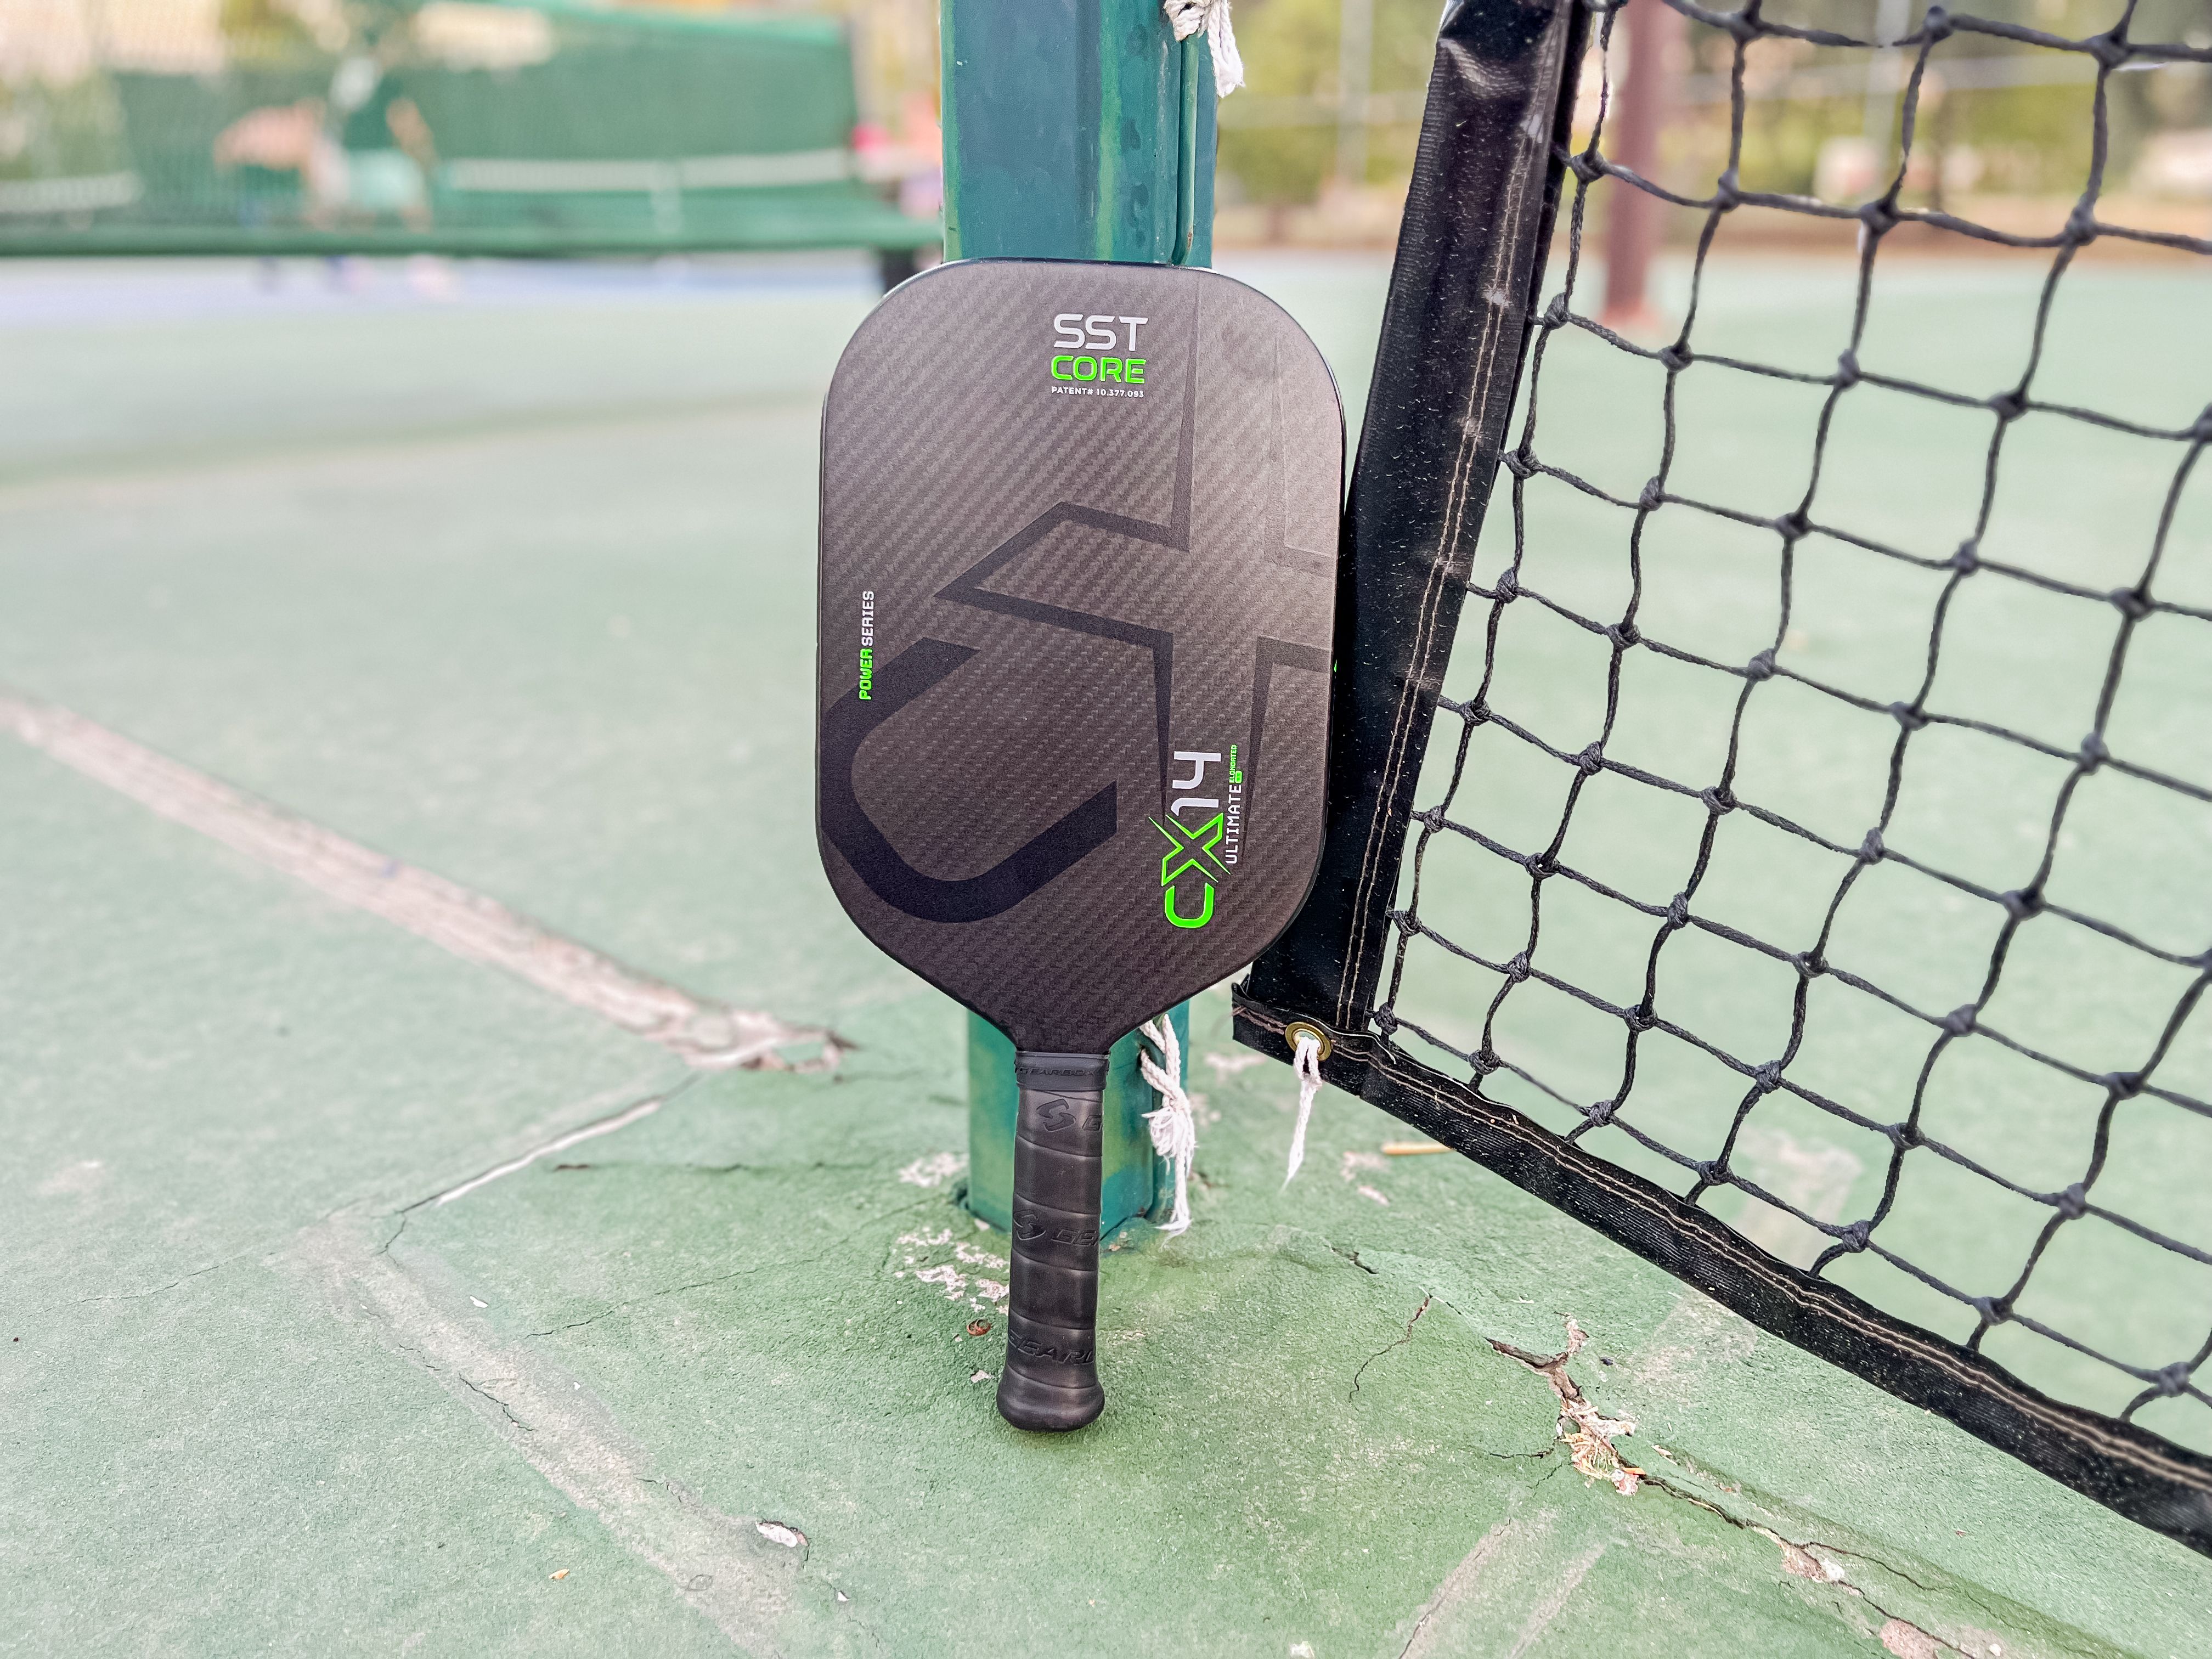 The Gearbox CX14E Ultimate Power pickleball paddle resting against a net